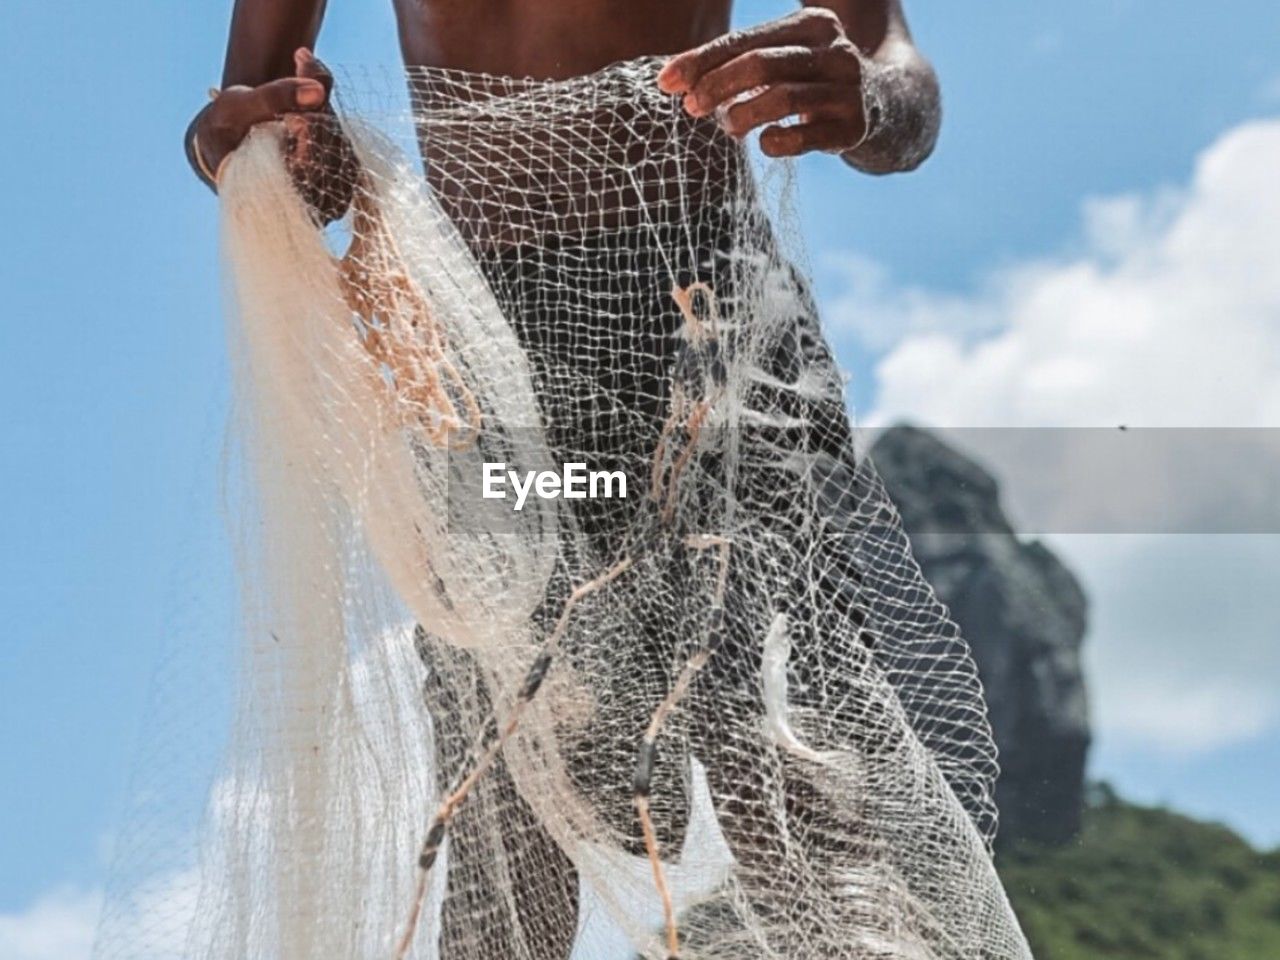 wedding dress, spring, sky, nature, one person, adult, bride, fishing net, cloud, day, fishing industry, dress, fishing, water, clothing, low angle view, activity, outdoors, commercial fishing net, veil, women, holding, motion, netting, blue, person, hand